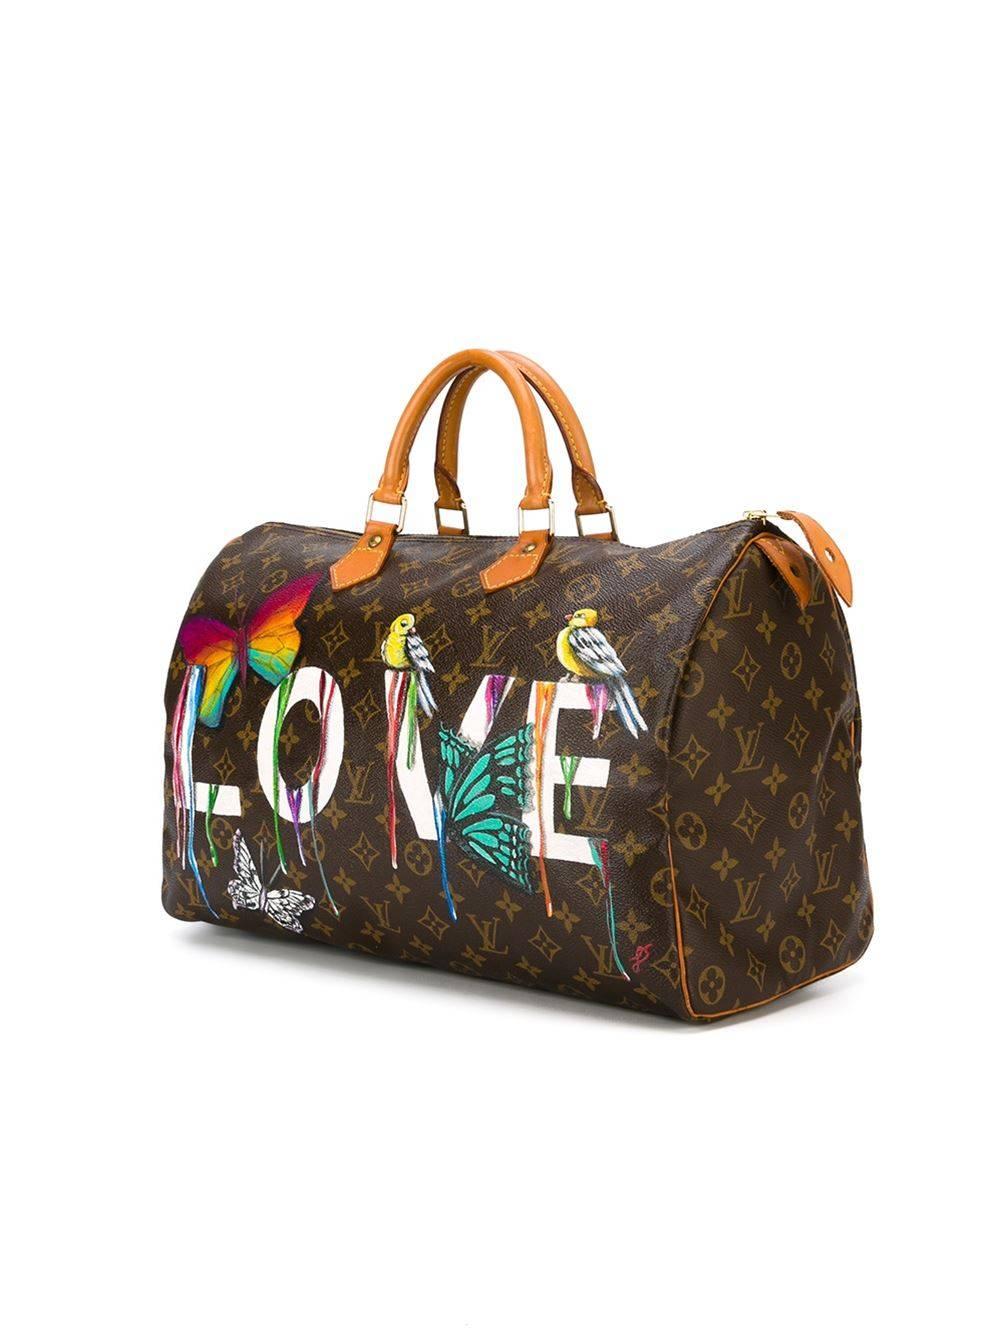 Hand painted vintage Louis Vuitton monogram leather Speedy bag featuring a customised hand painted design. 

Material: Monogram Leather 

Colour: Brown, Hand-painted design 

Rewind Vintage Emotional Baggage

The brainchild of Rewind, these